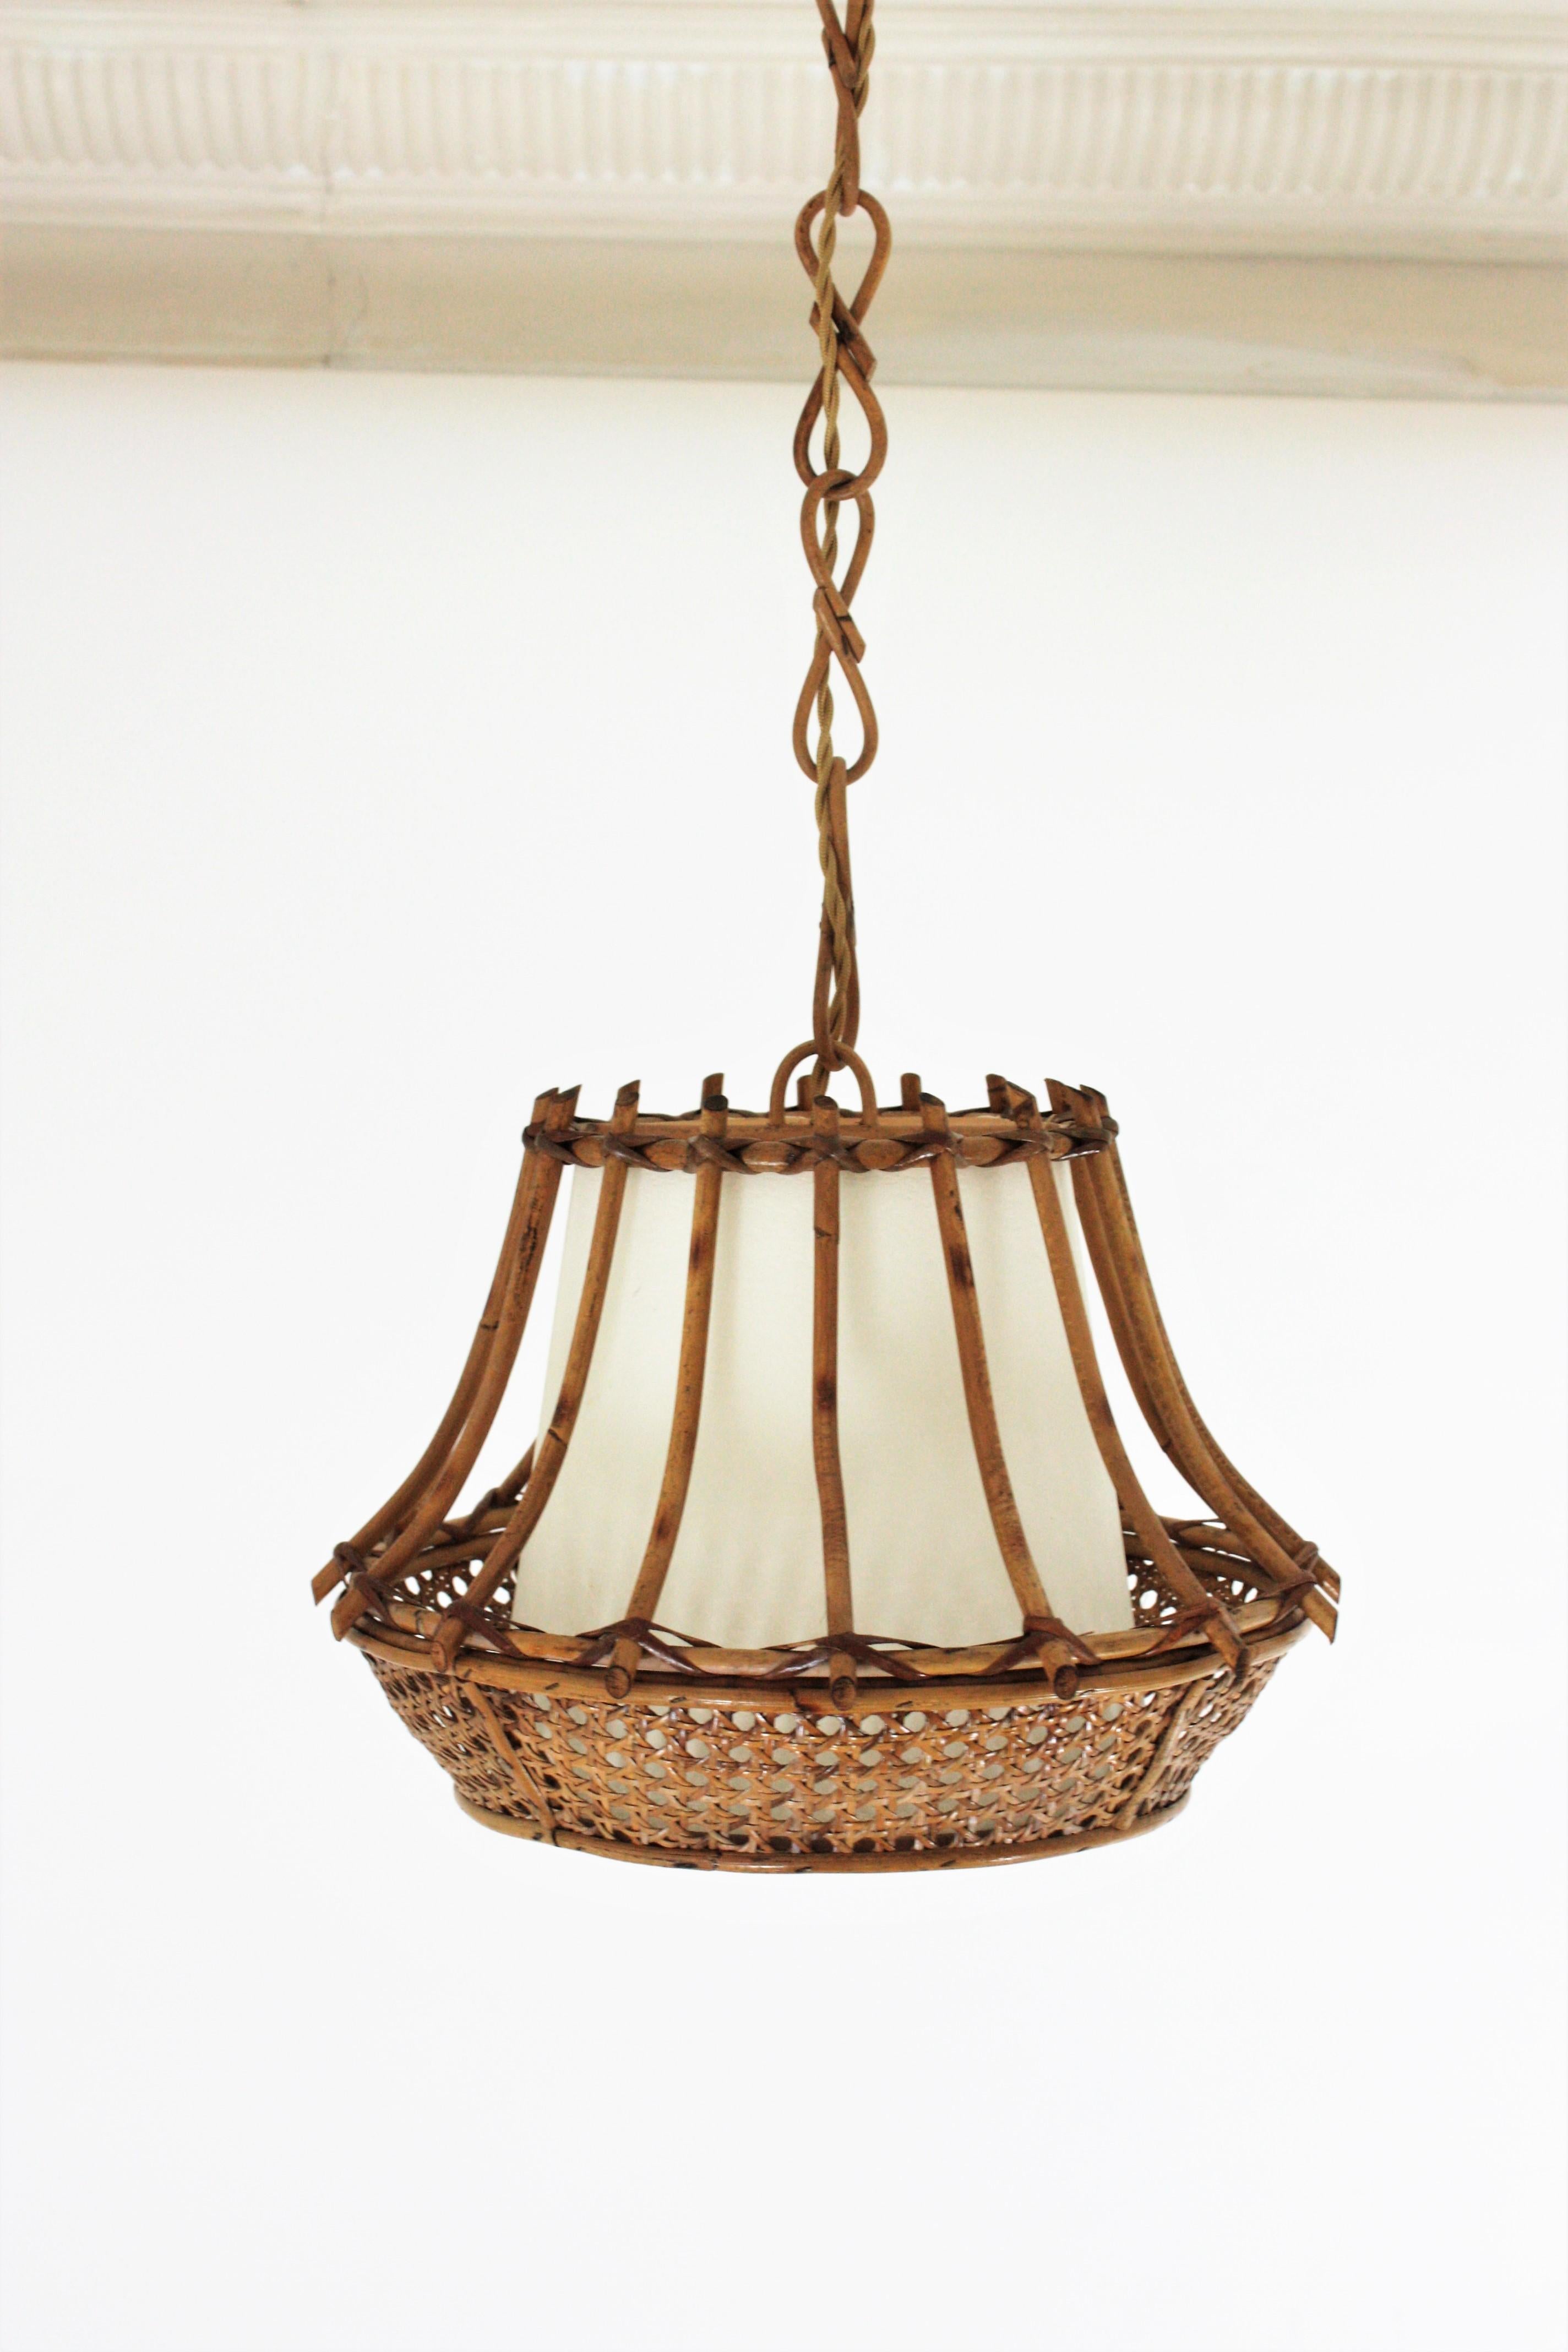 Hand-Crafted Rattan Wicker Pagoda Pendant Light or Lantern, 1960s For Sale